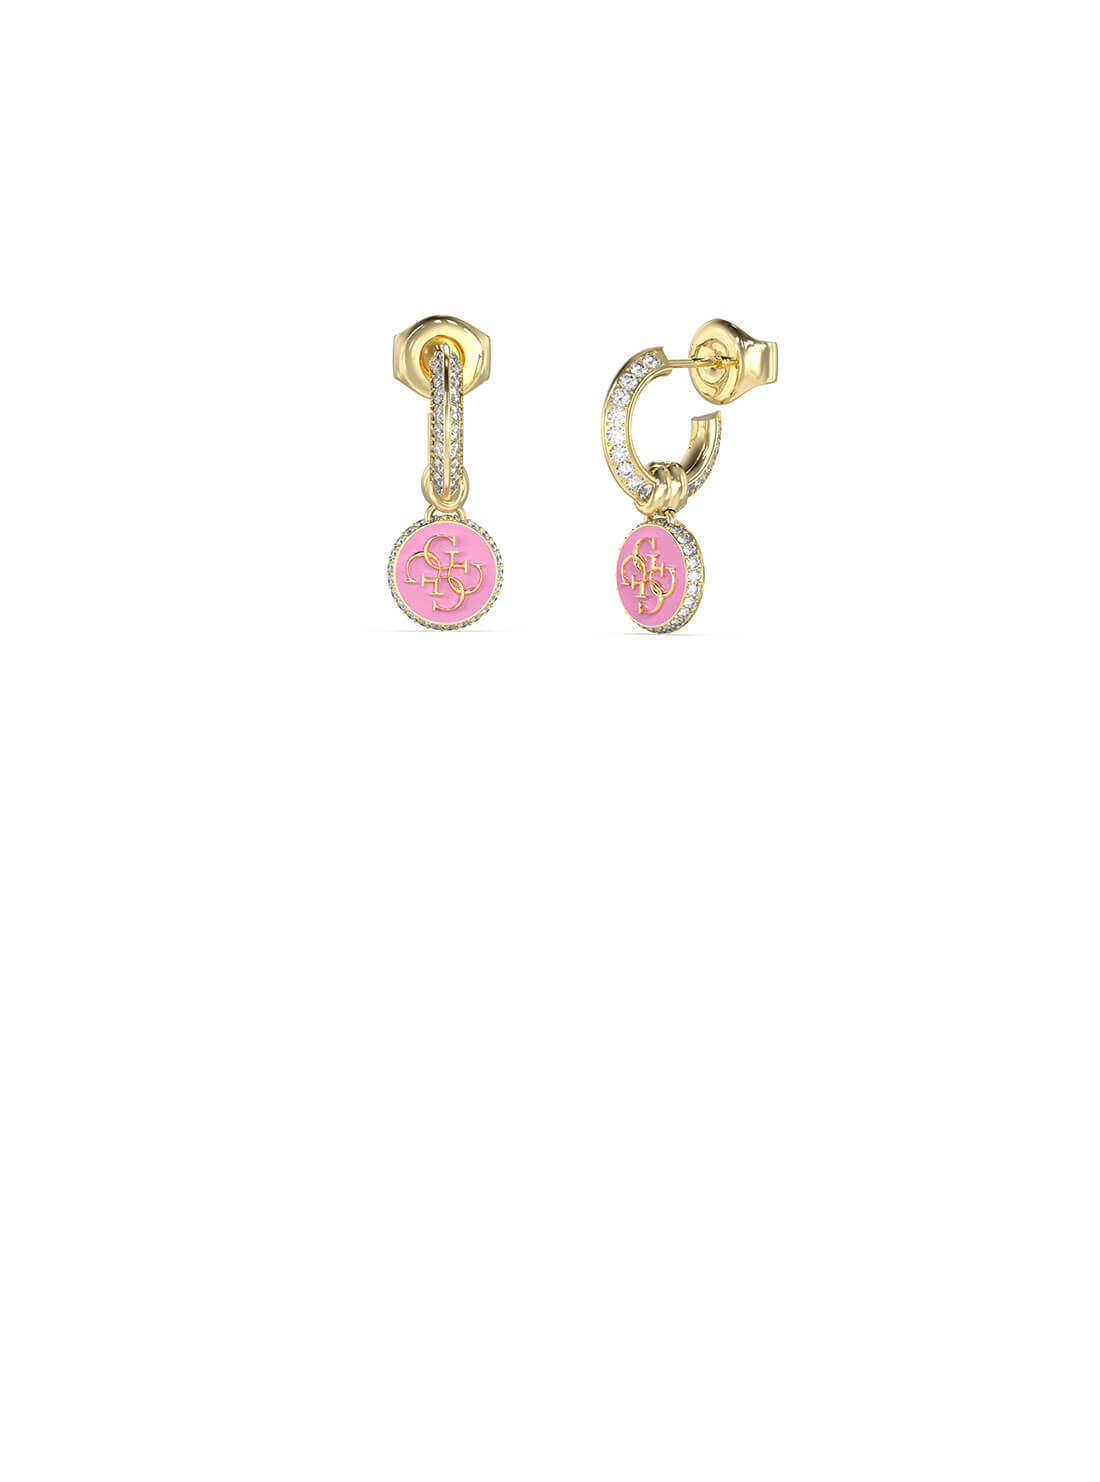 Gold Knot You Pink Crystal Stud Earrings | GUESS Women's Jewellery | front view